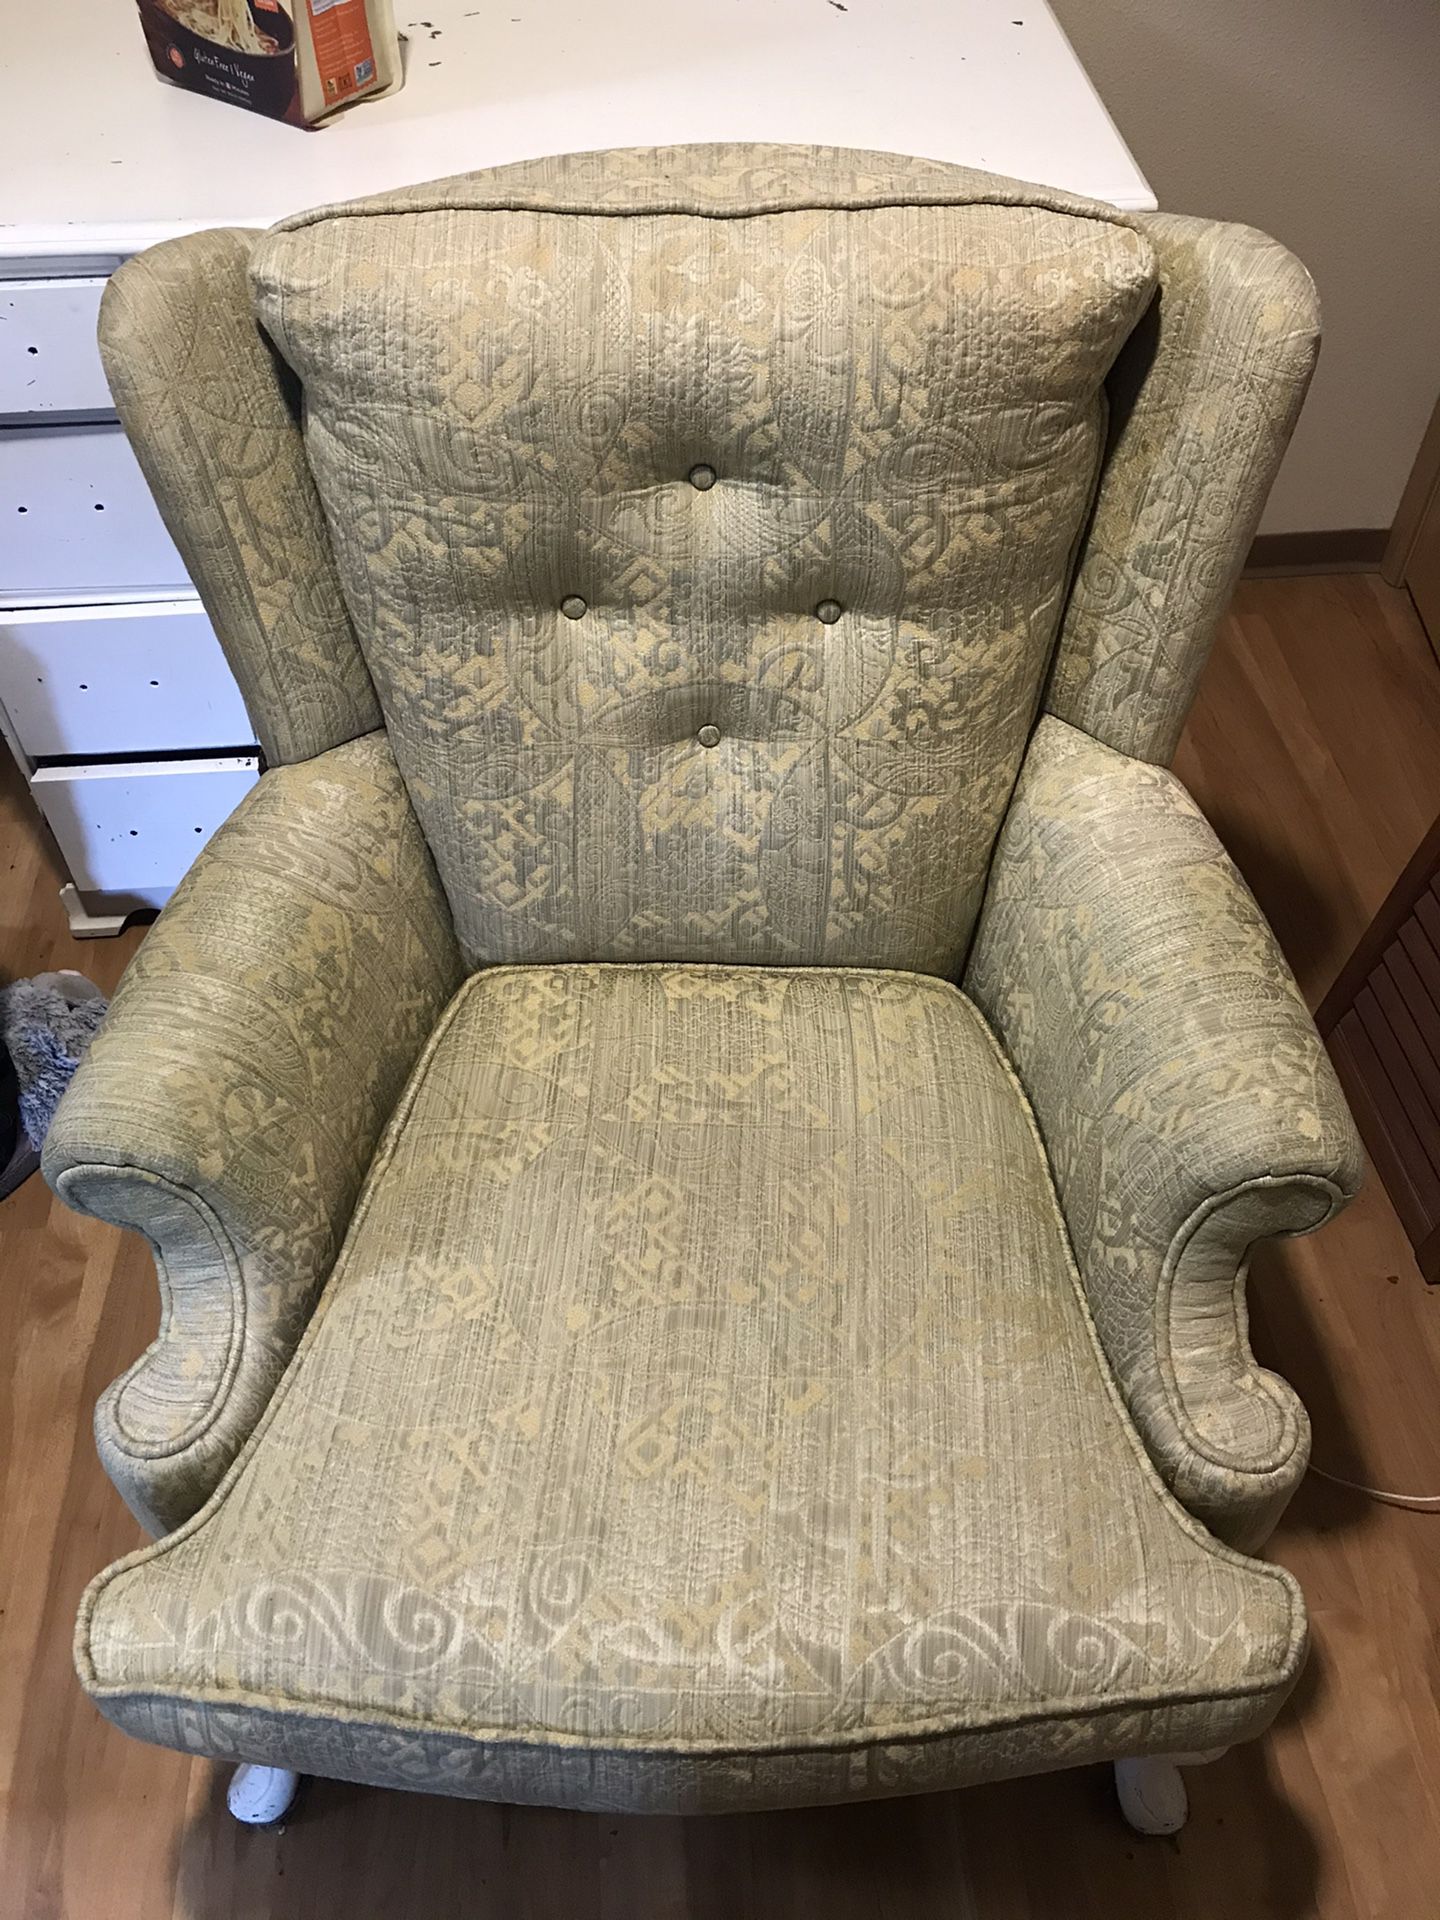 Antique green & gold chair YOU HAUL